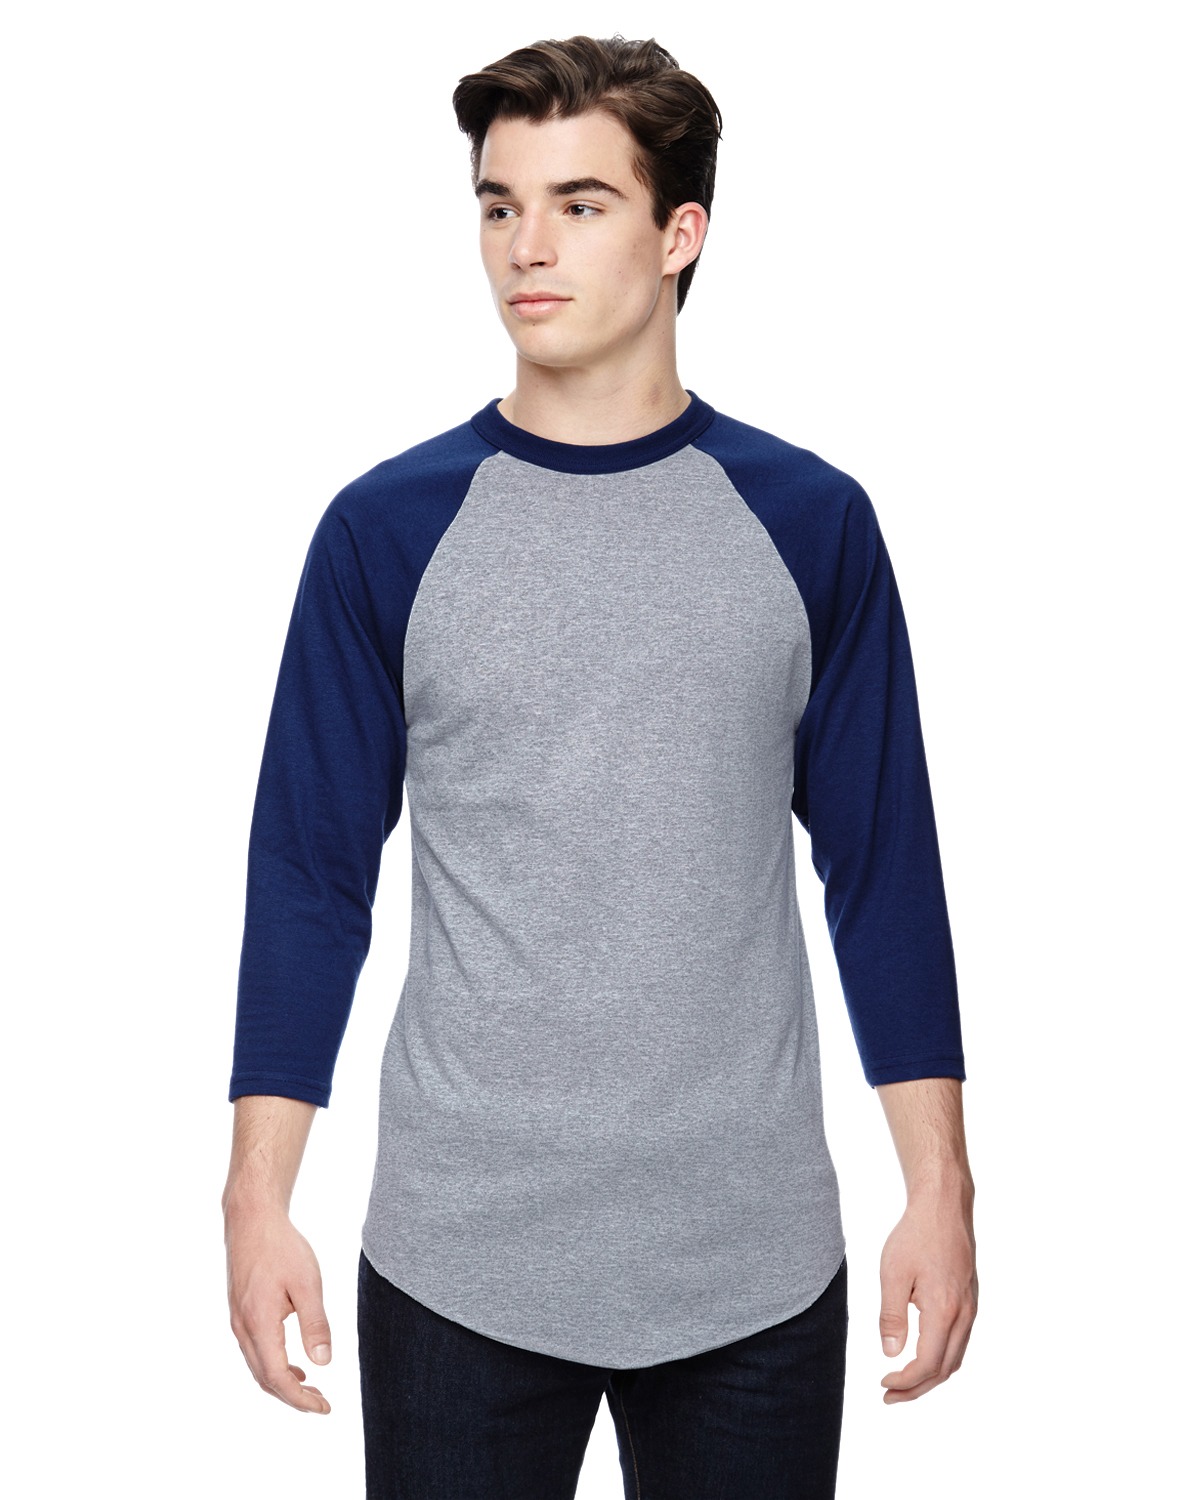 click to view Athletic Heather/Navy